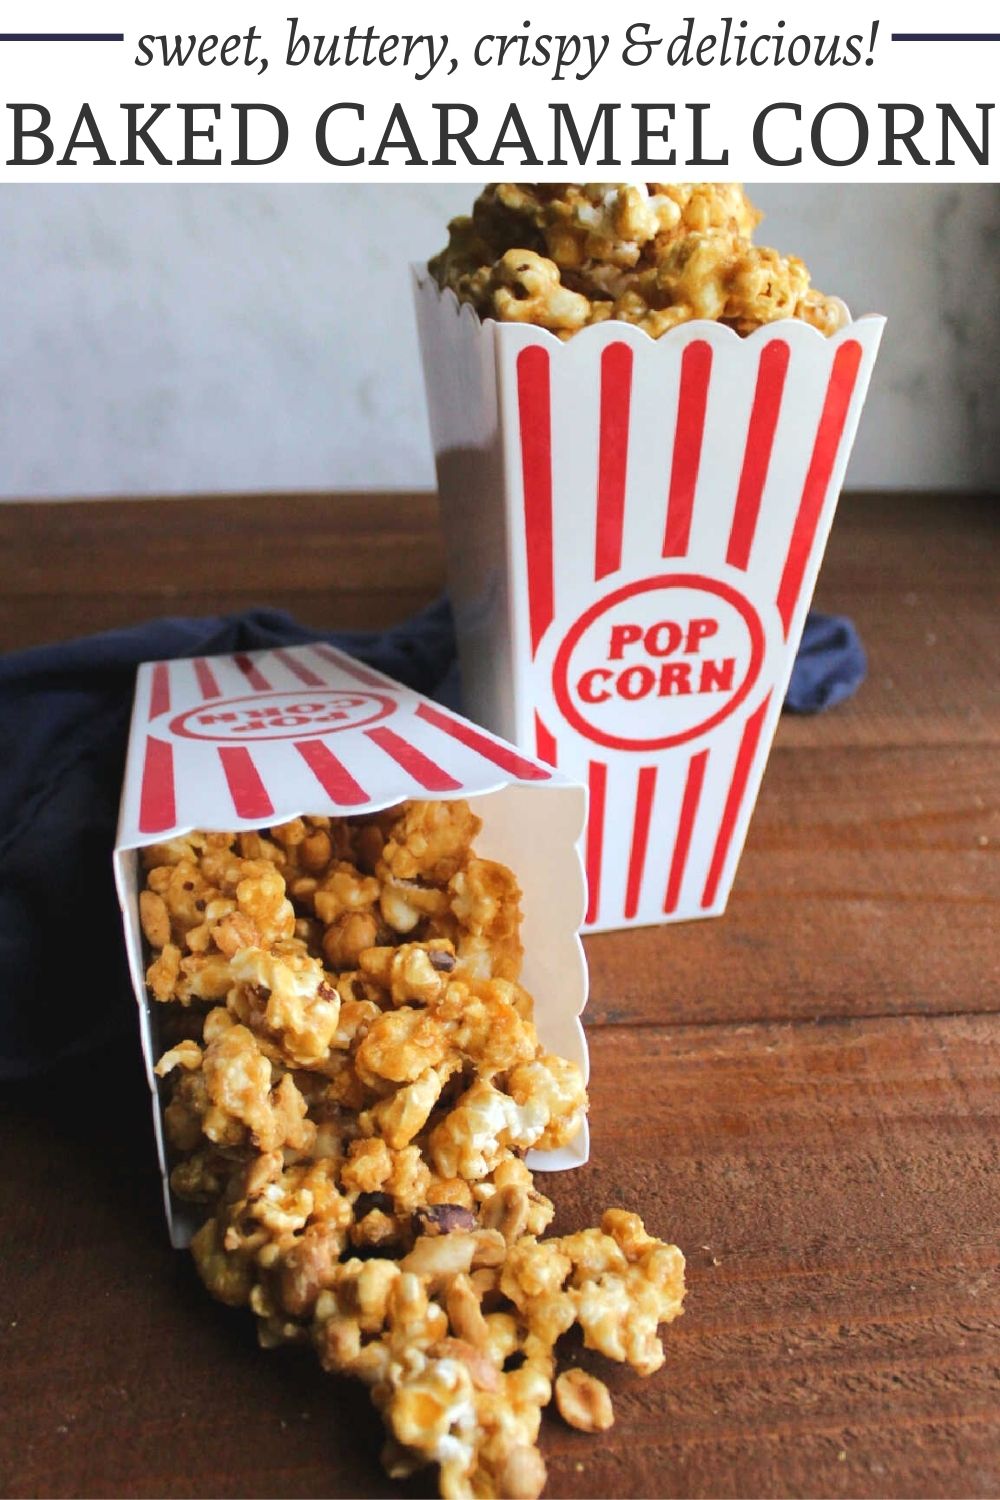 This recipe makes the perfect crunchy, buttery caramel corn.  Popcorn and peanuts are coated in a simple brown sugar caramel and baked until crispy. It is perfect for movie night, game night, and more.